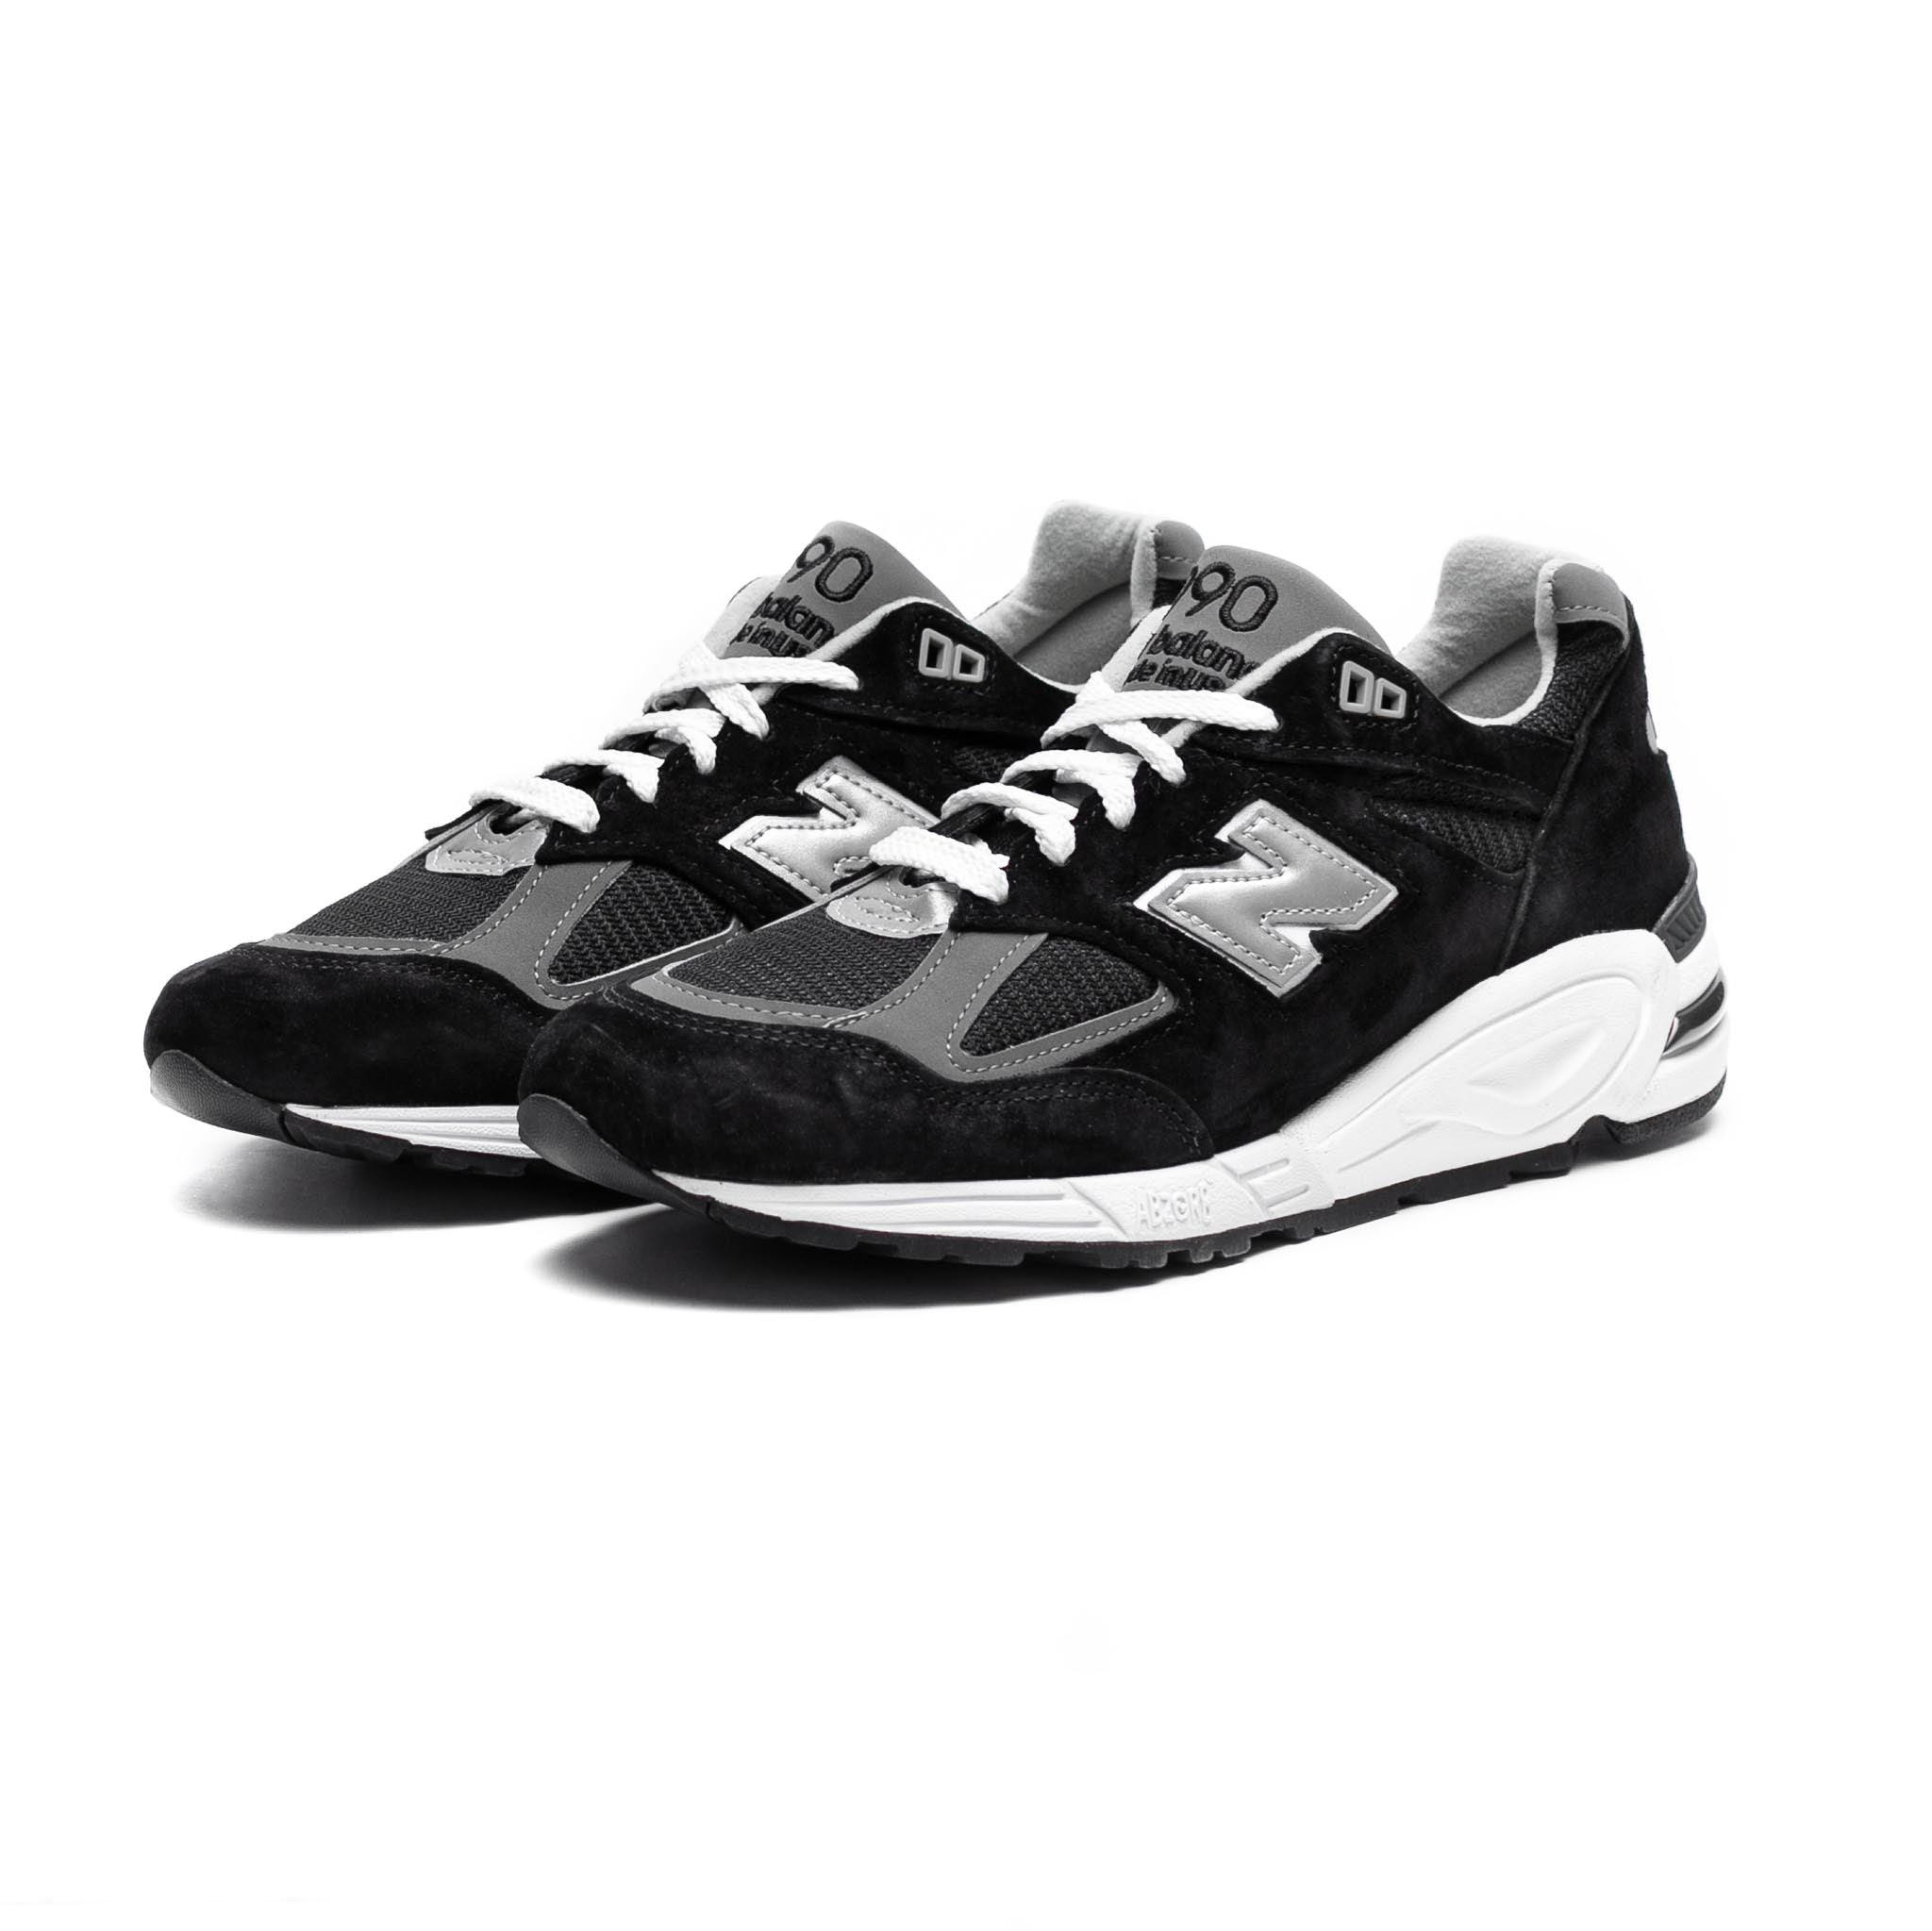 New Balance 'Made in the USA' M990BL2 Black